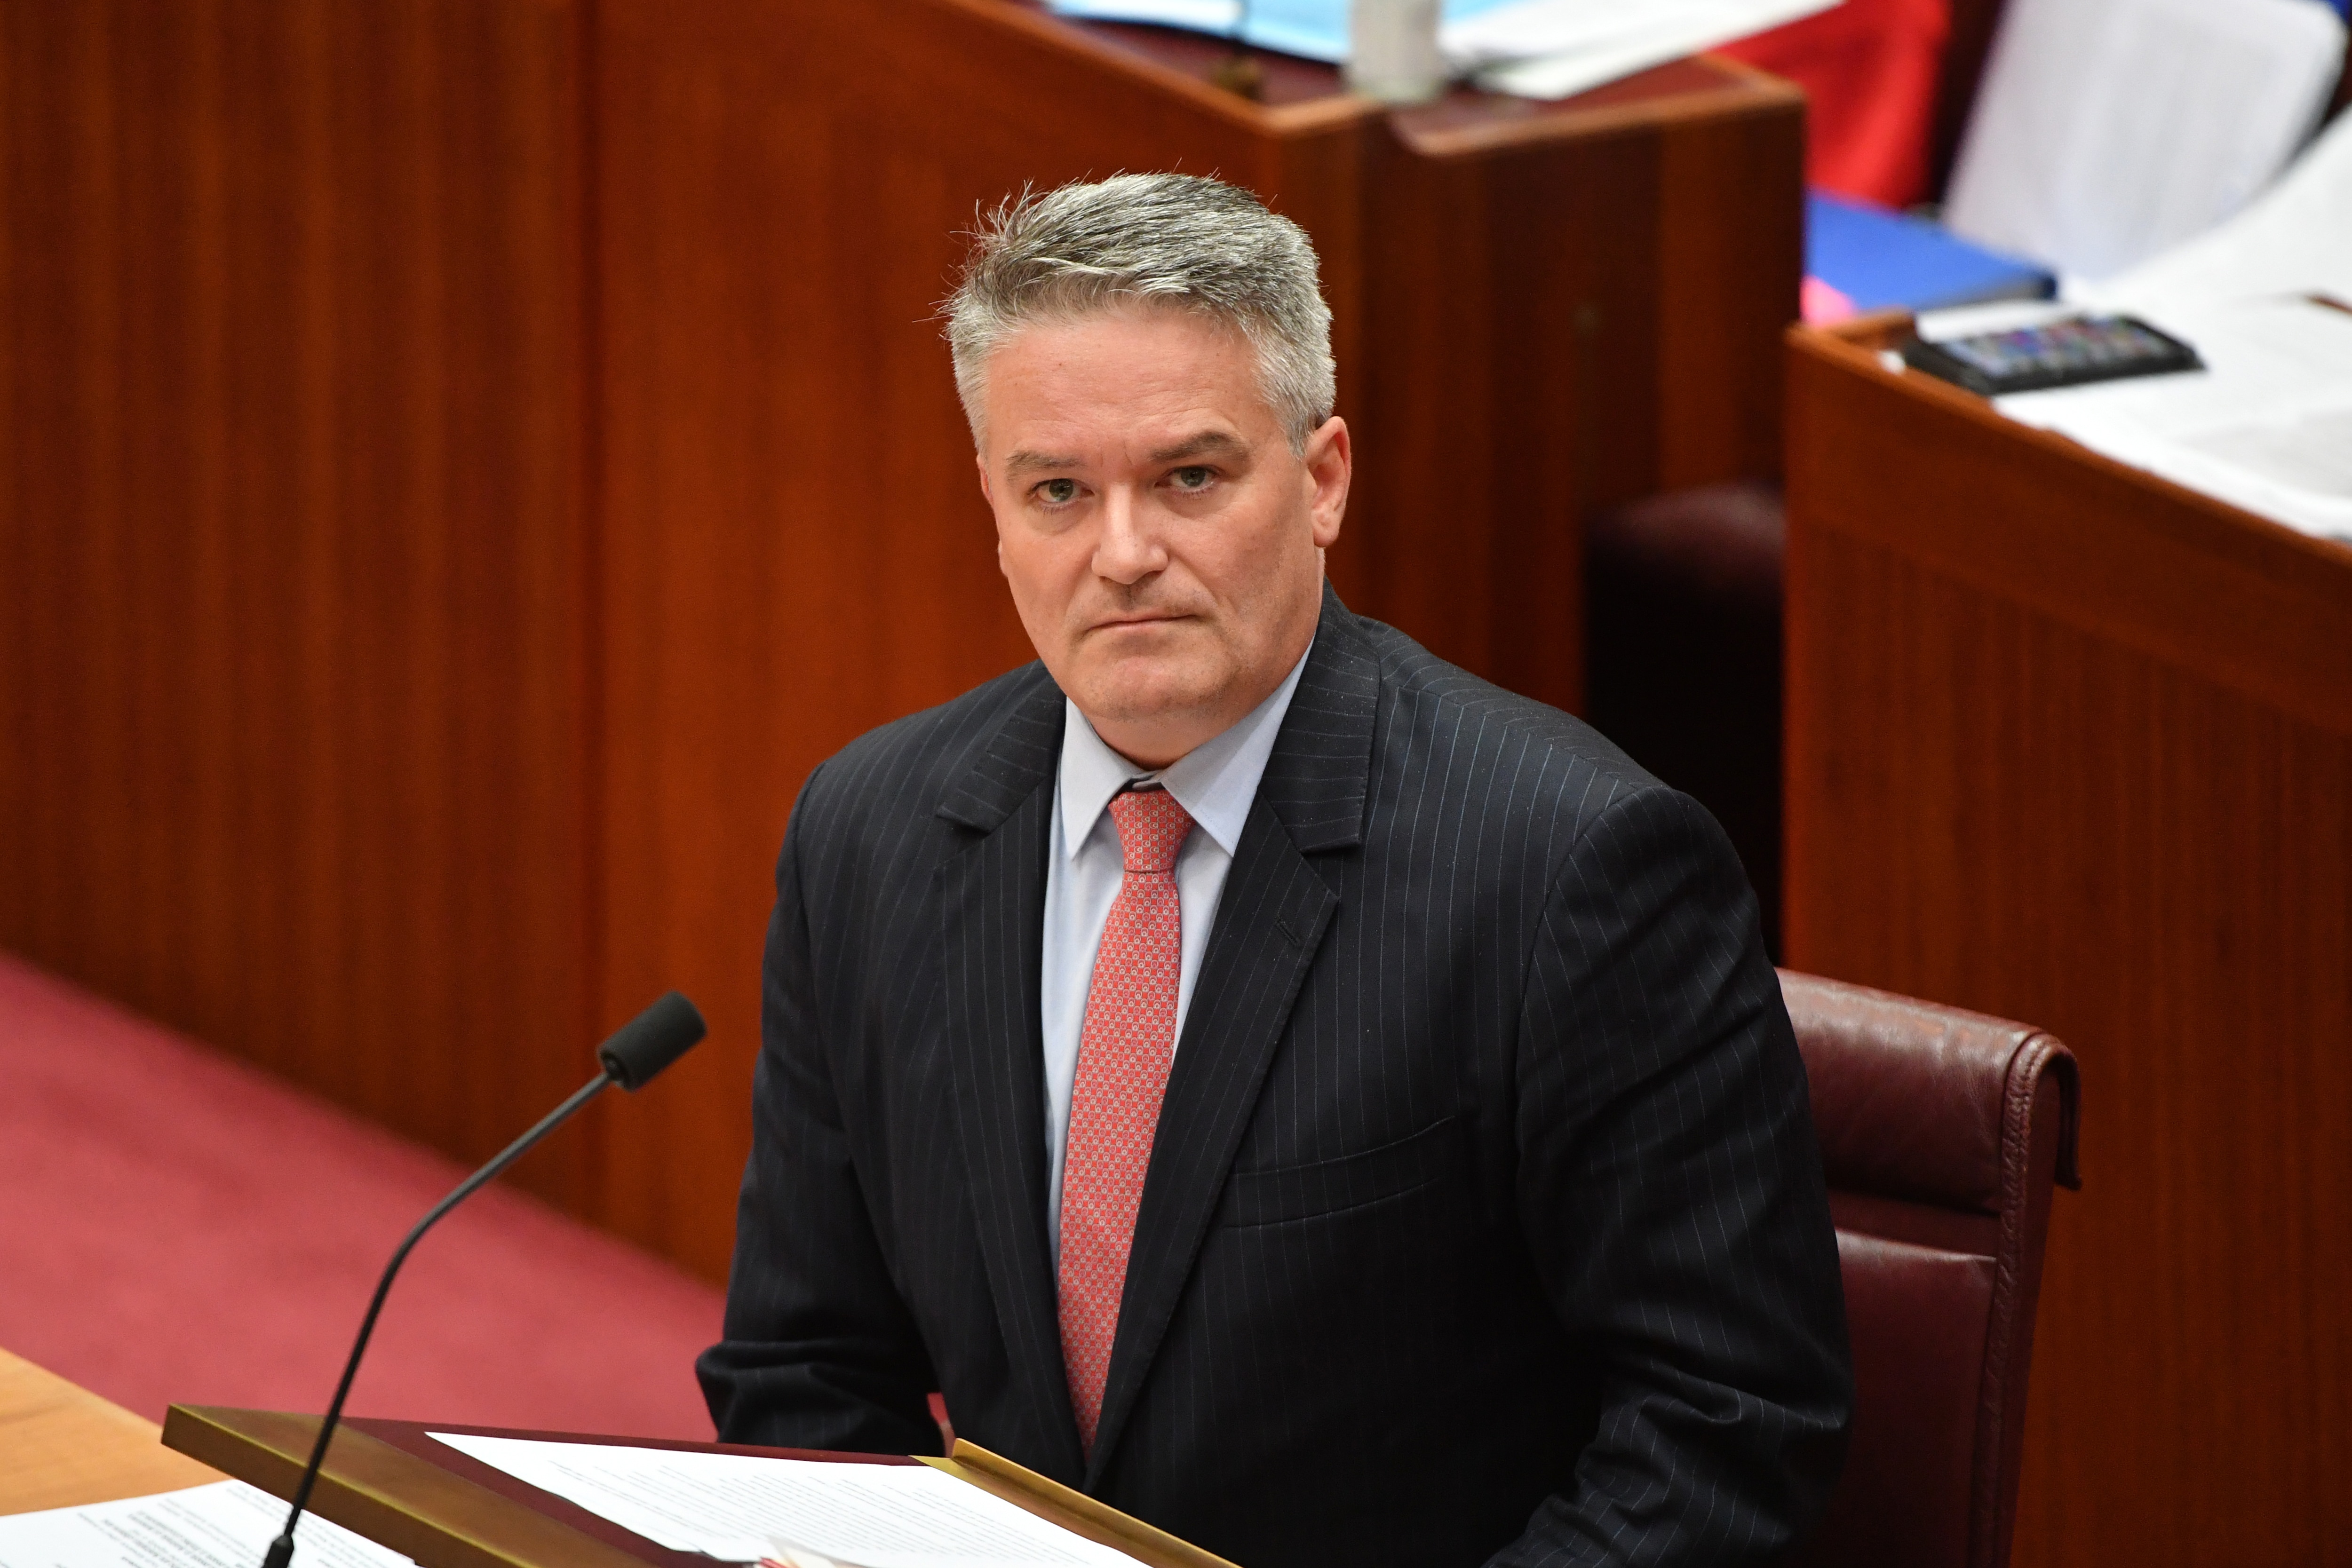 Minister for Finance Mathias Cormann during Question Time in the Senate Chamber at Parliament.